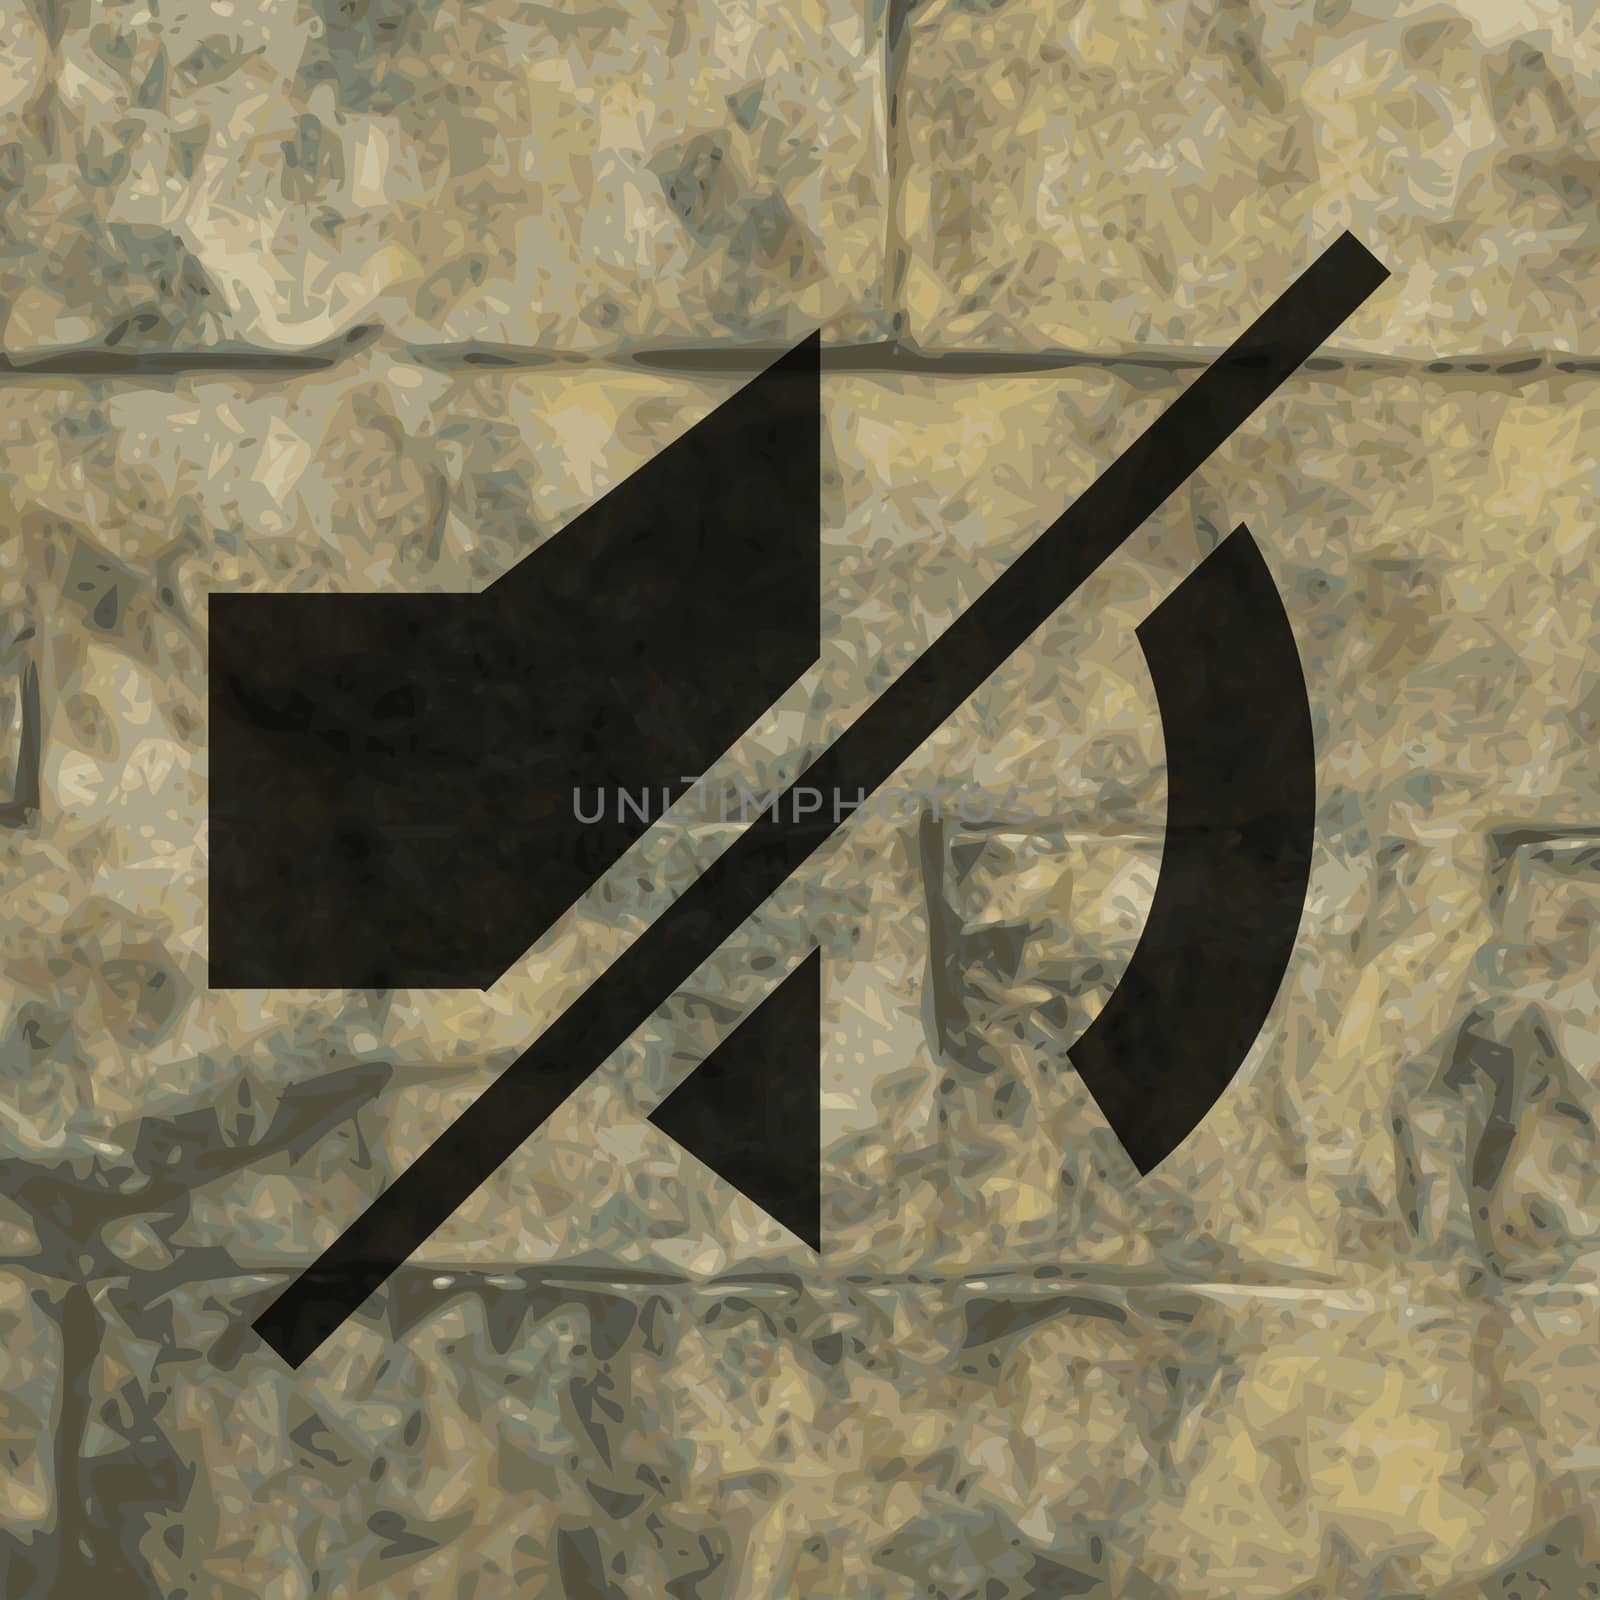 Mute sound icon Flat with abstract background.